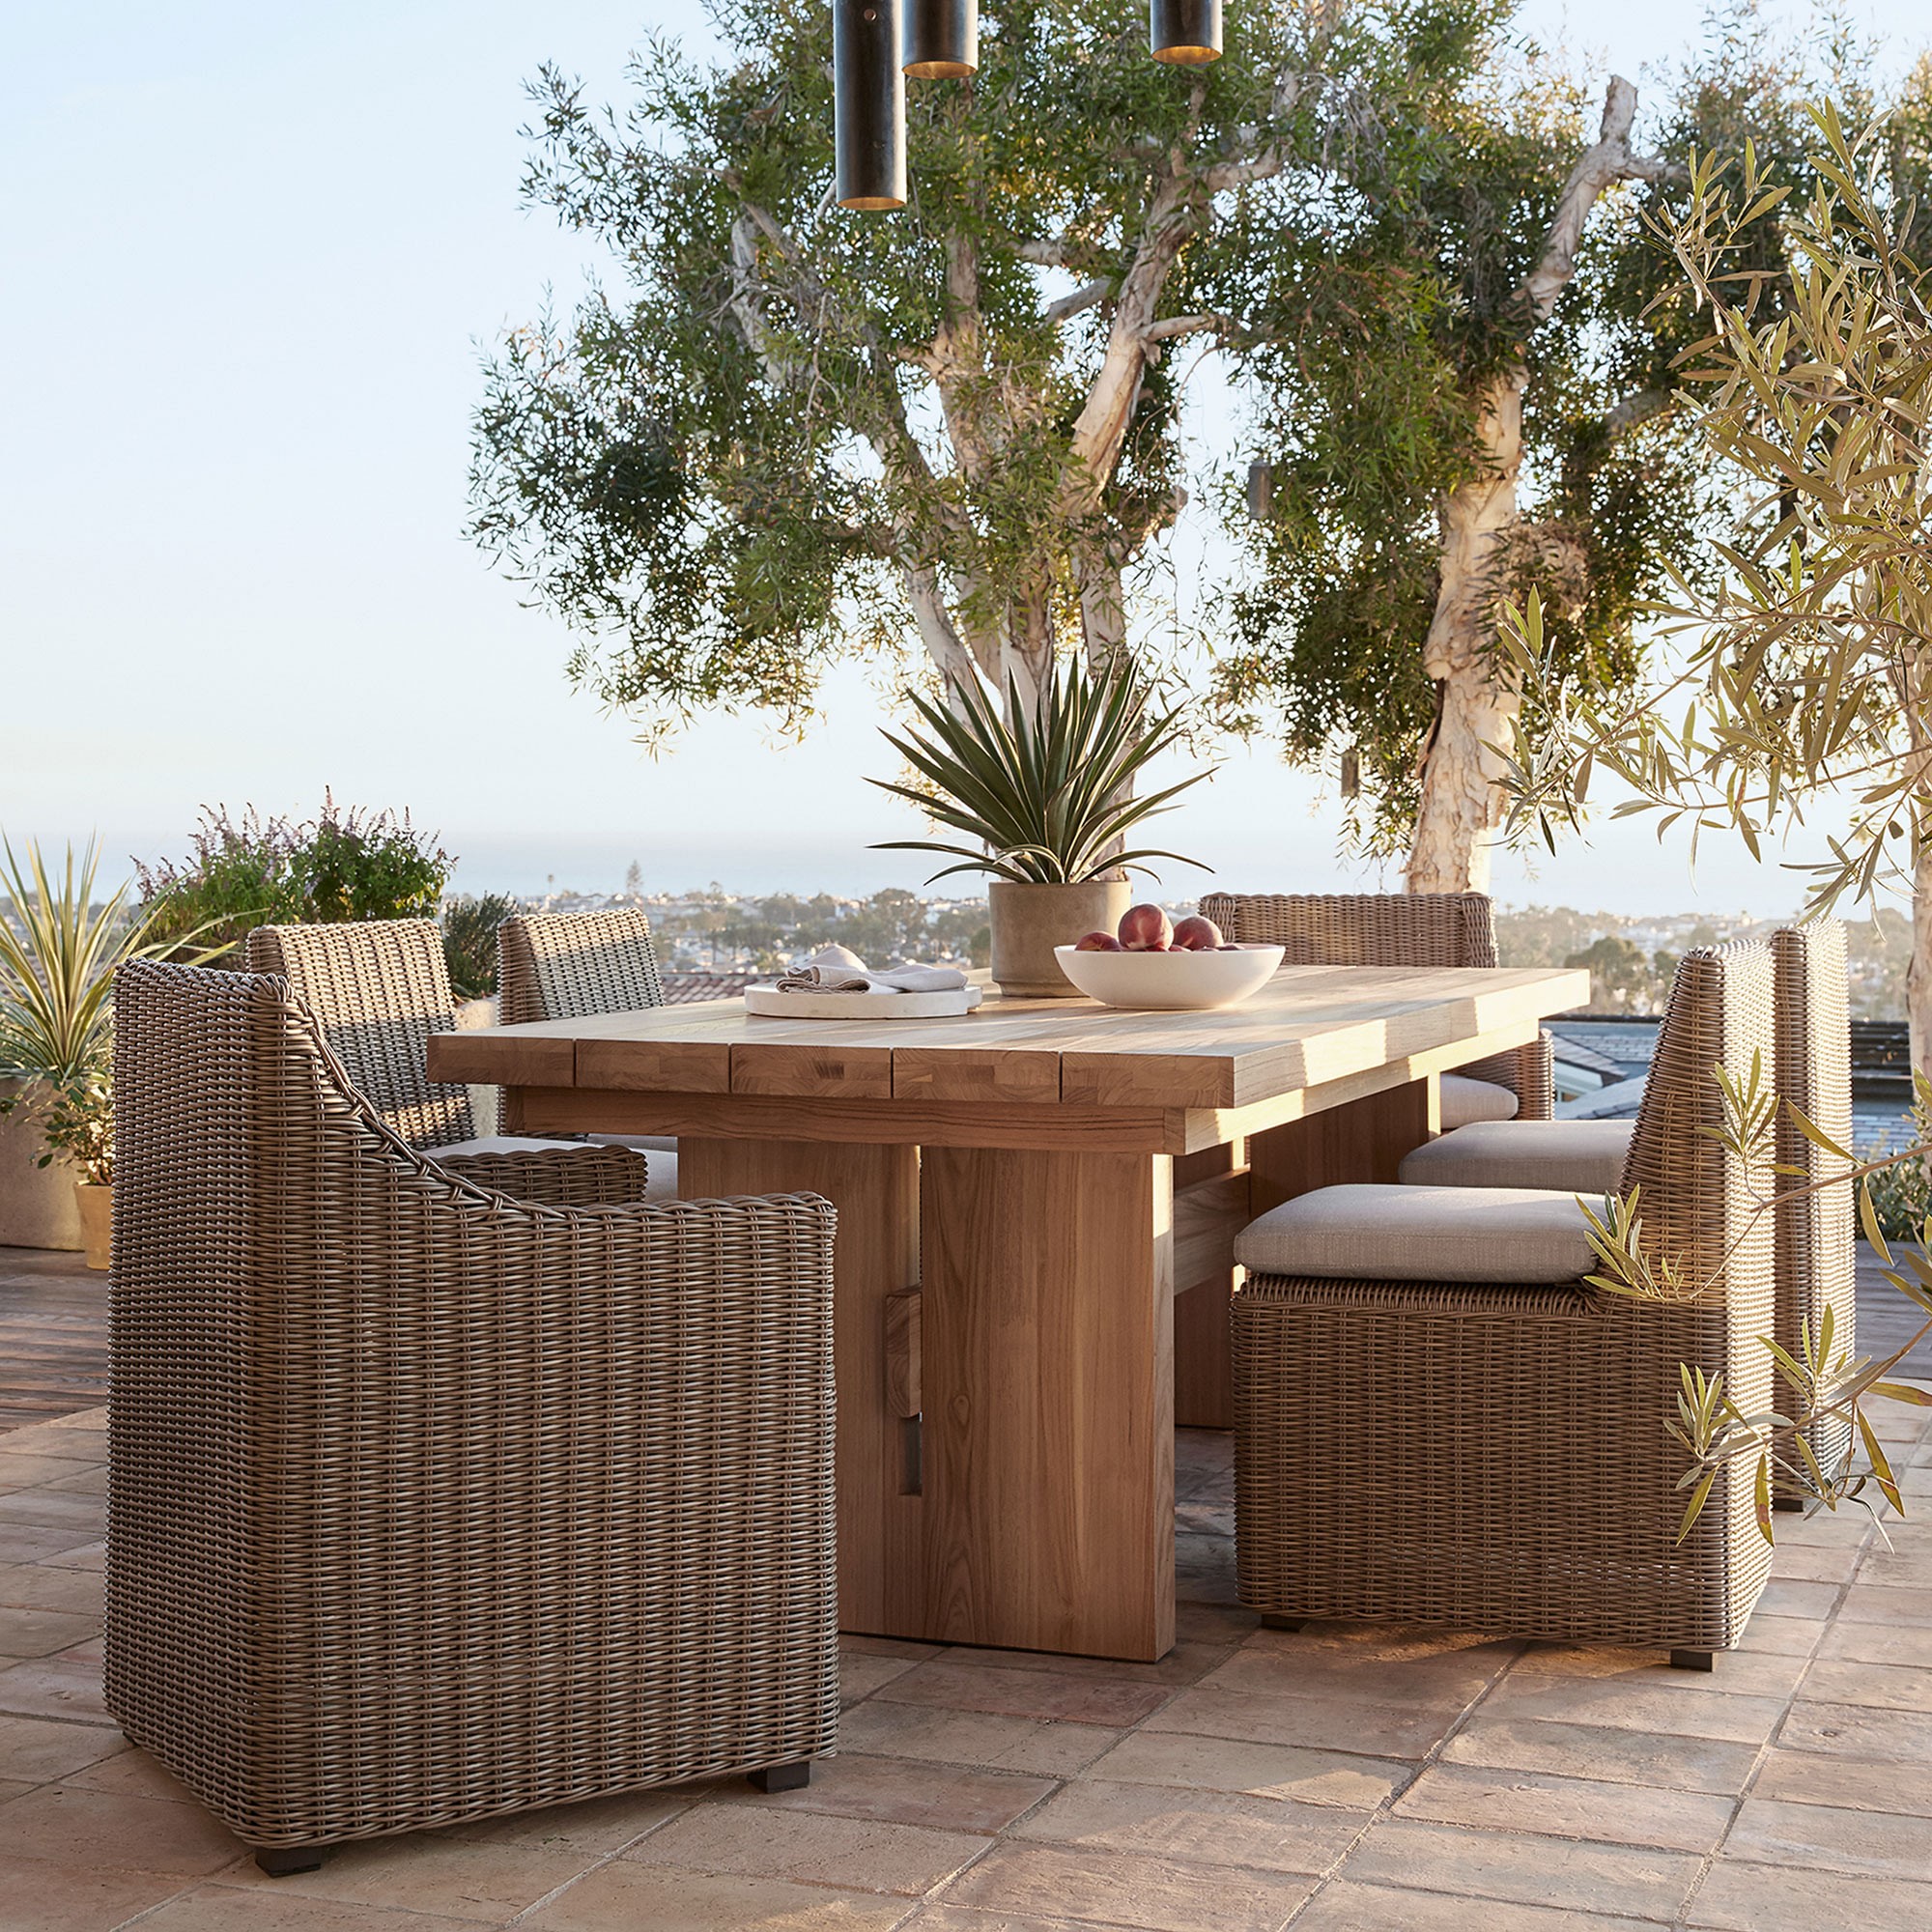 San Clemente Outdoor Teak Dining Table & AWW Dining Chairs